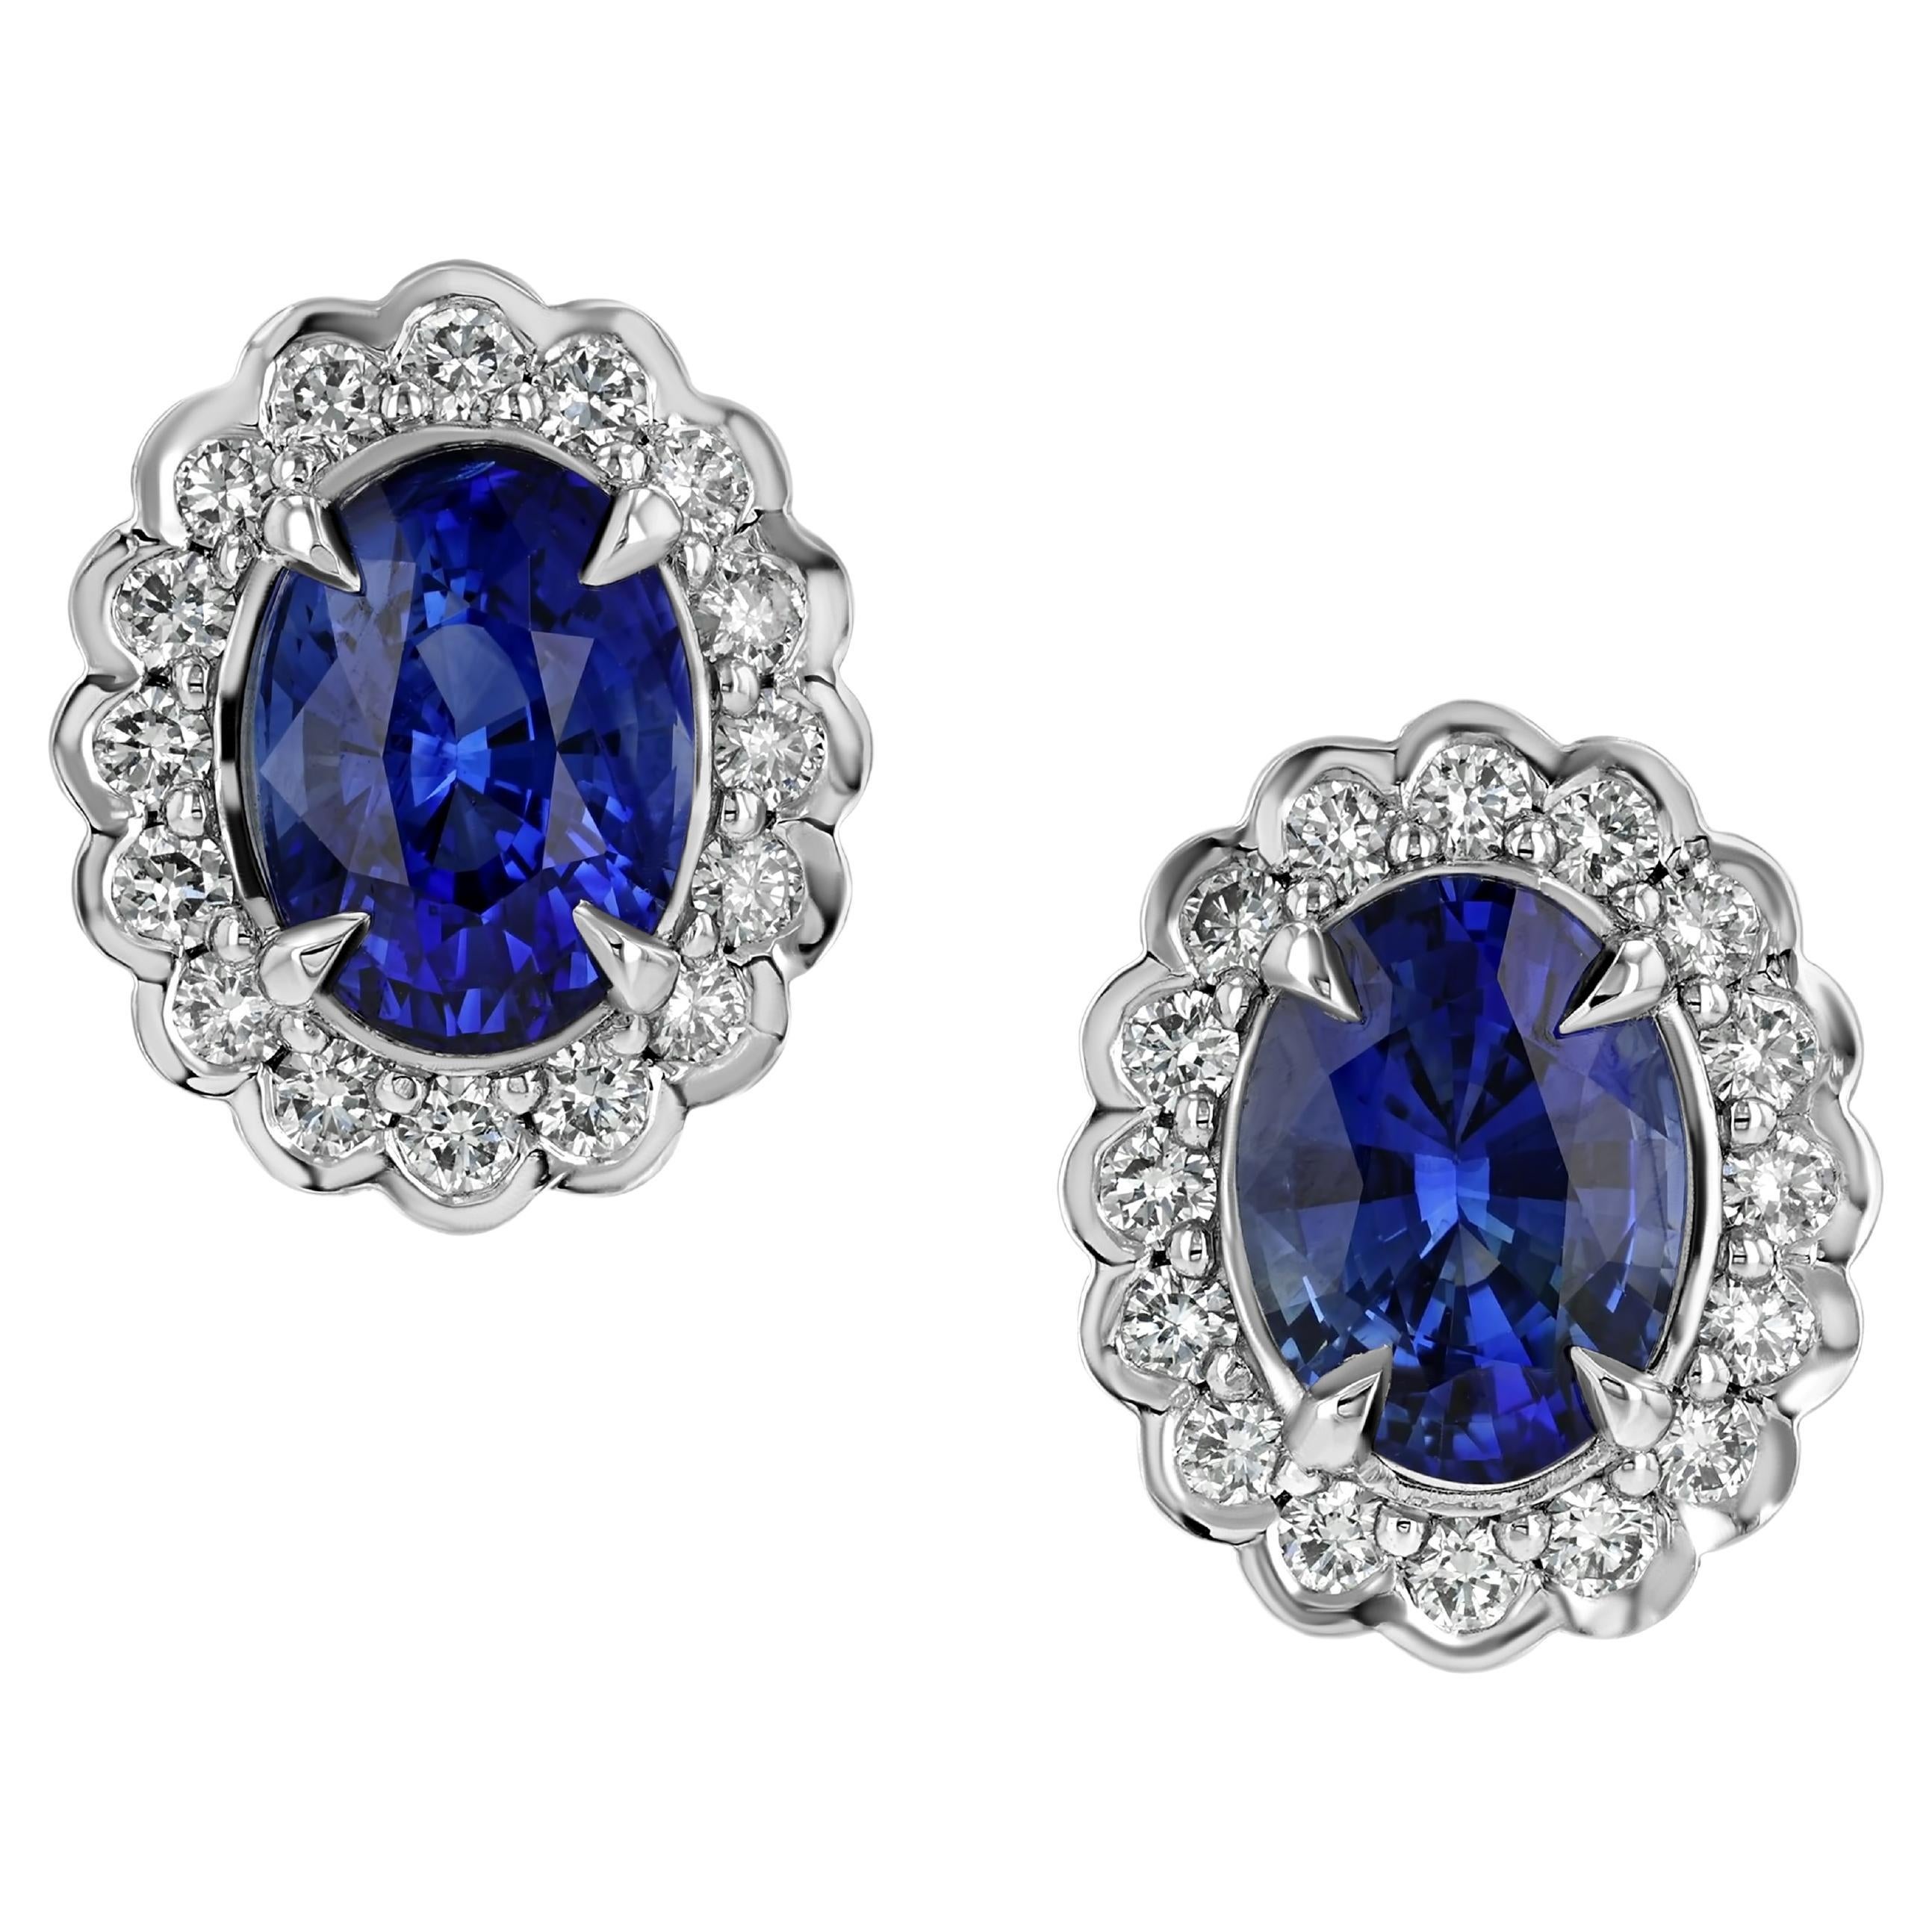 3.09ct GIA certified, Ceylon oval Blue Sapphire platinum earrings.